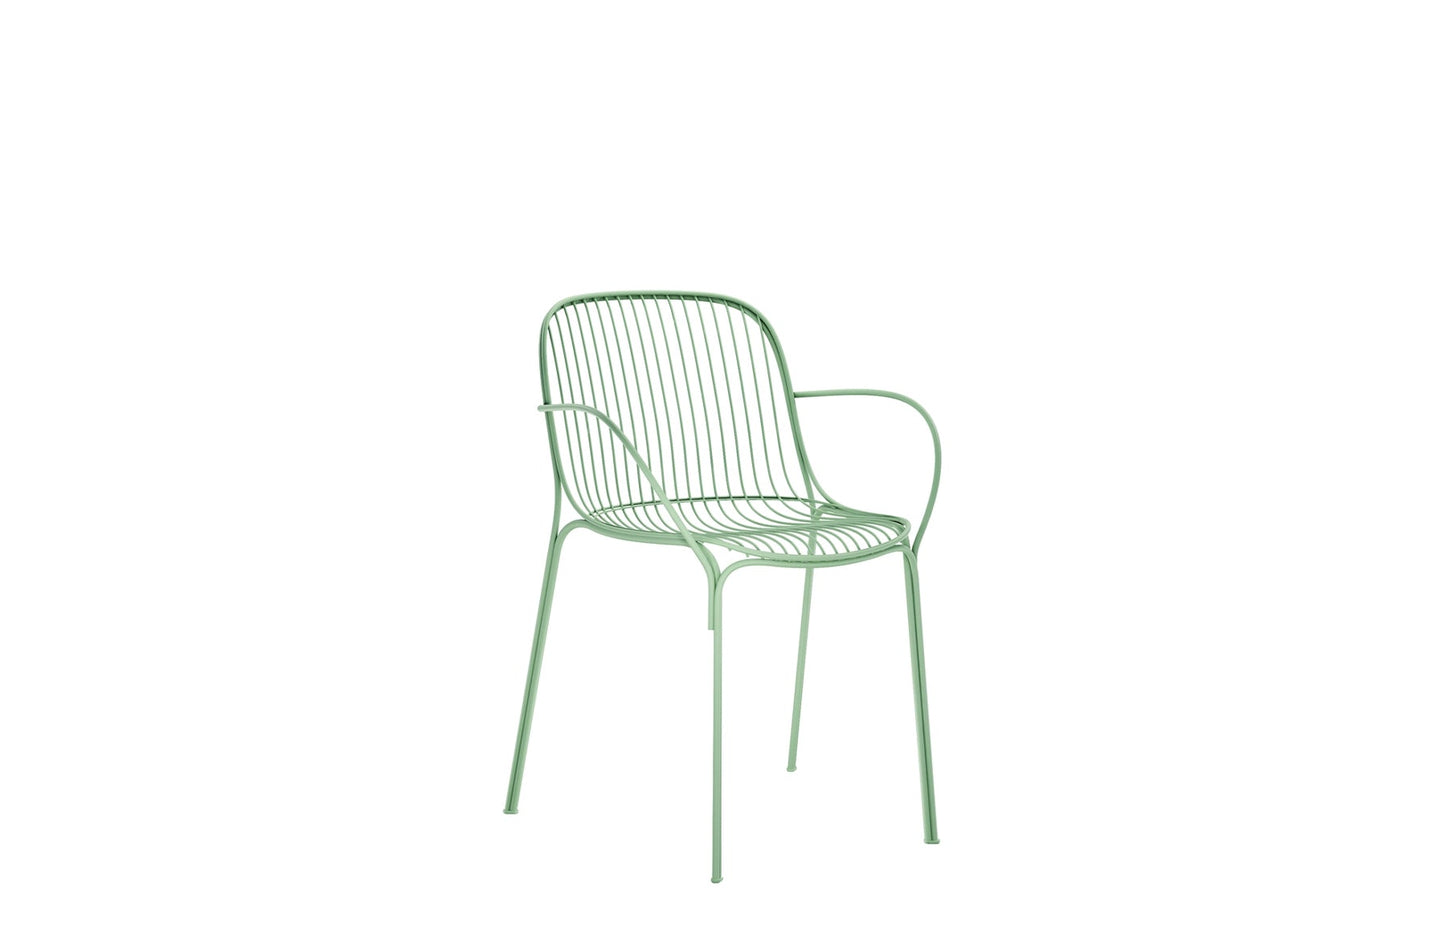 HiRay Chair with Arms
